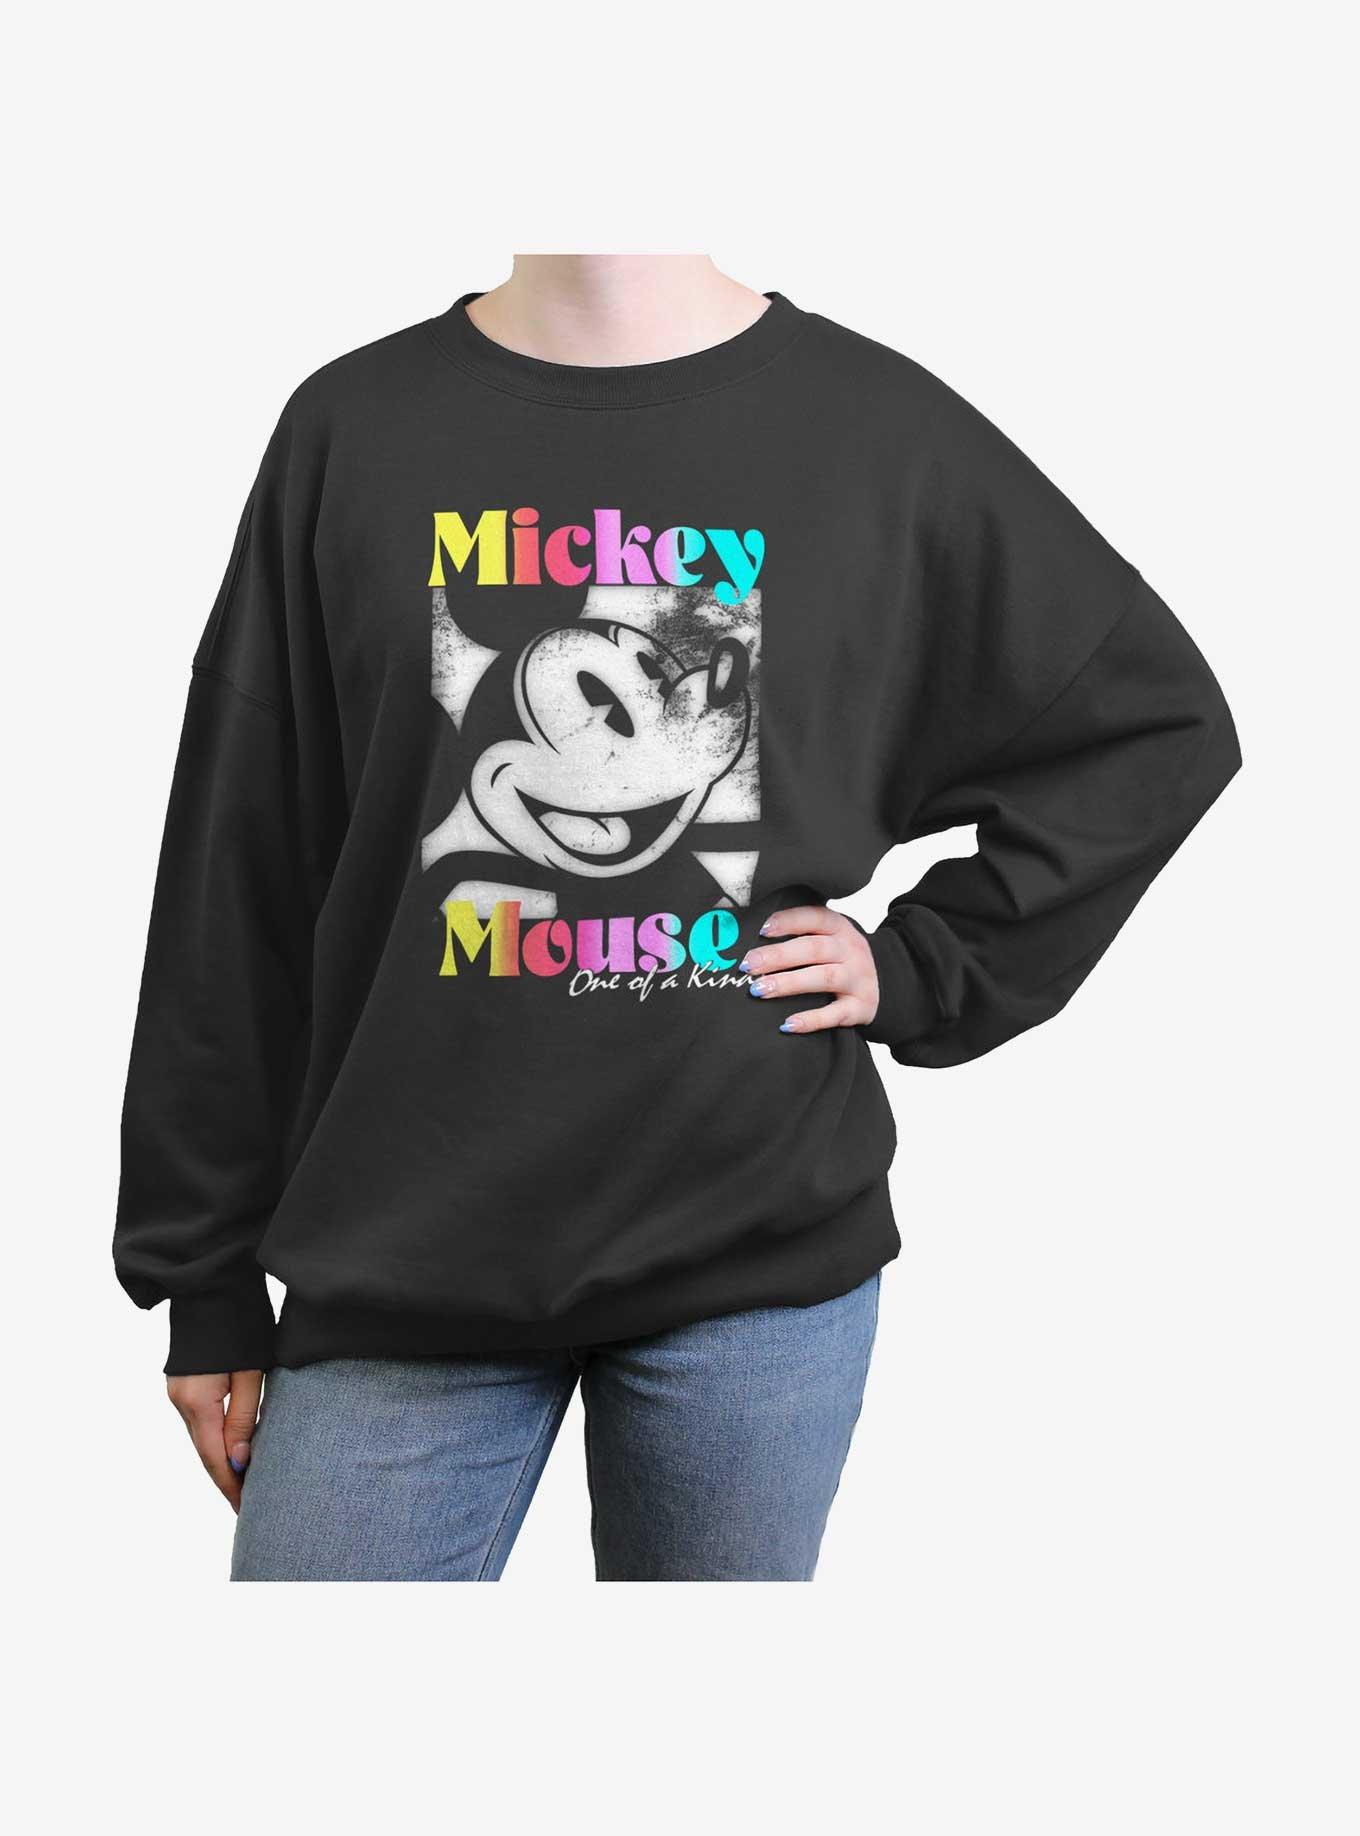 Disney Mickey Mouse one of a kind distressed Girls Oversized Sweatshirt, CHARCOAL, hi-res